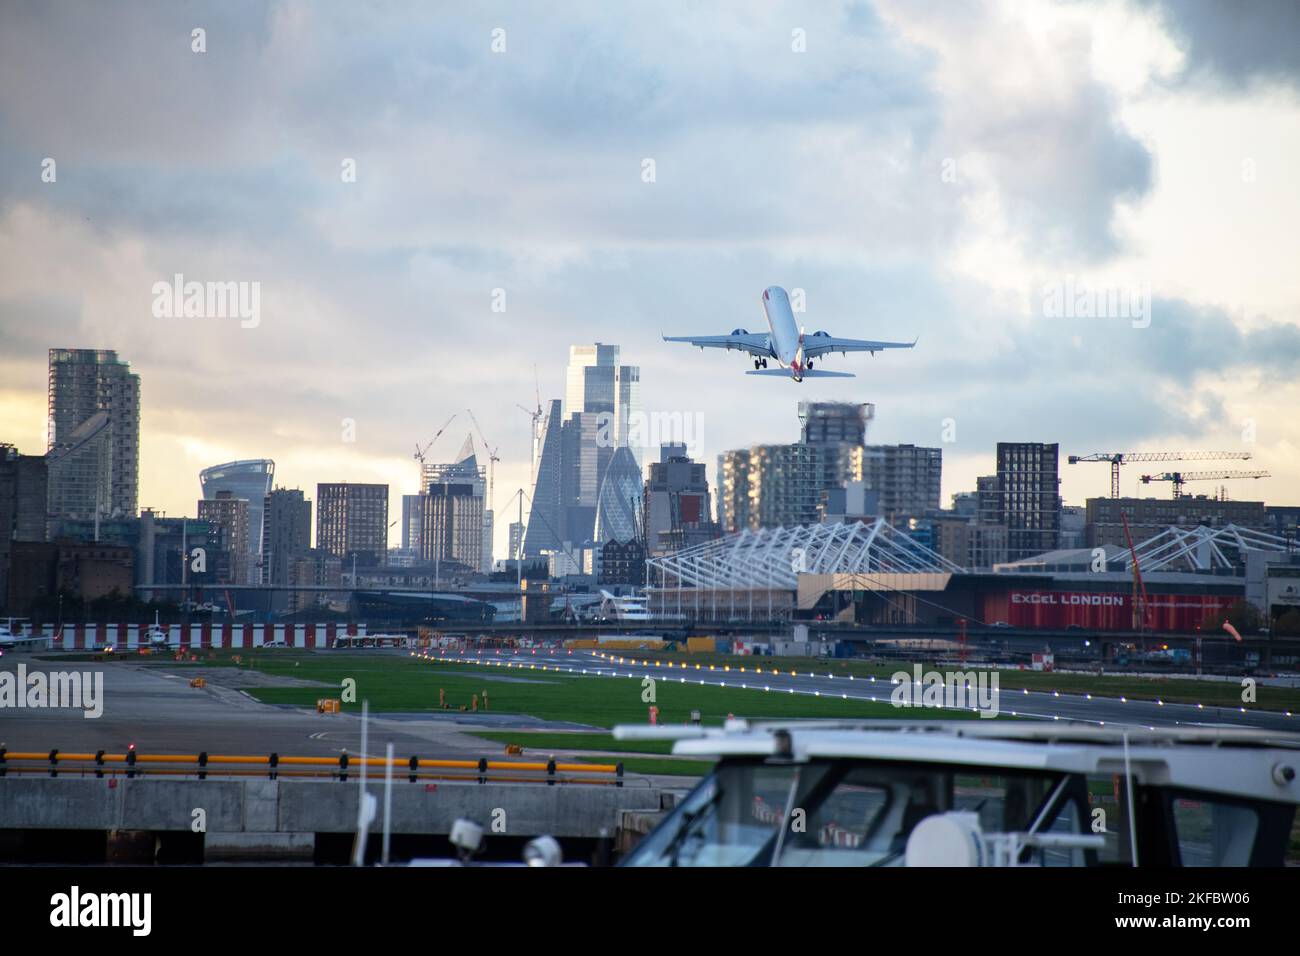 A British Airways Embraer ERJ-190 takes Off into dark clouds at London City Airport with Canary Wharf in the background. Stock Photo